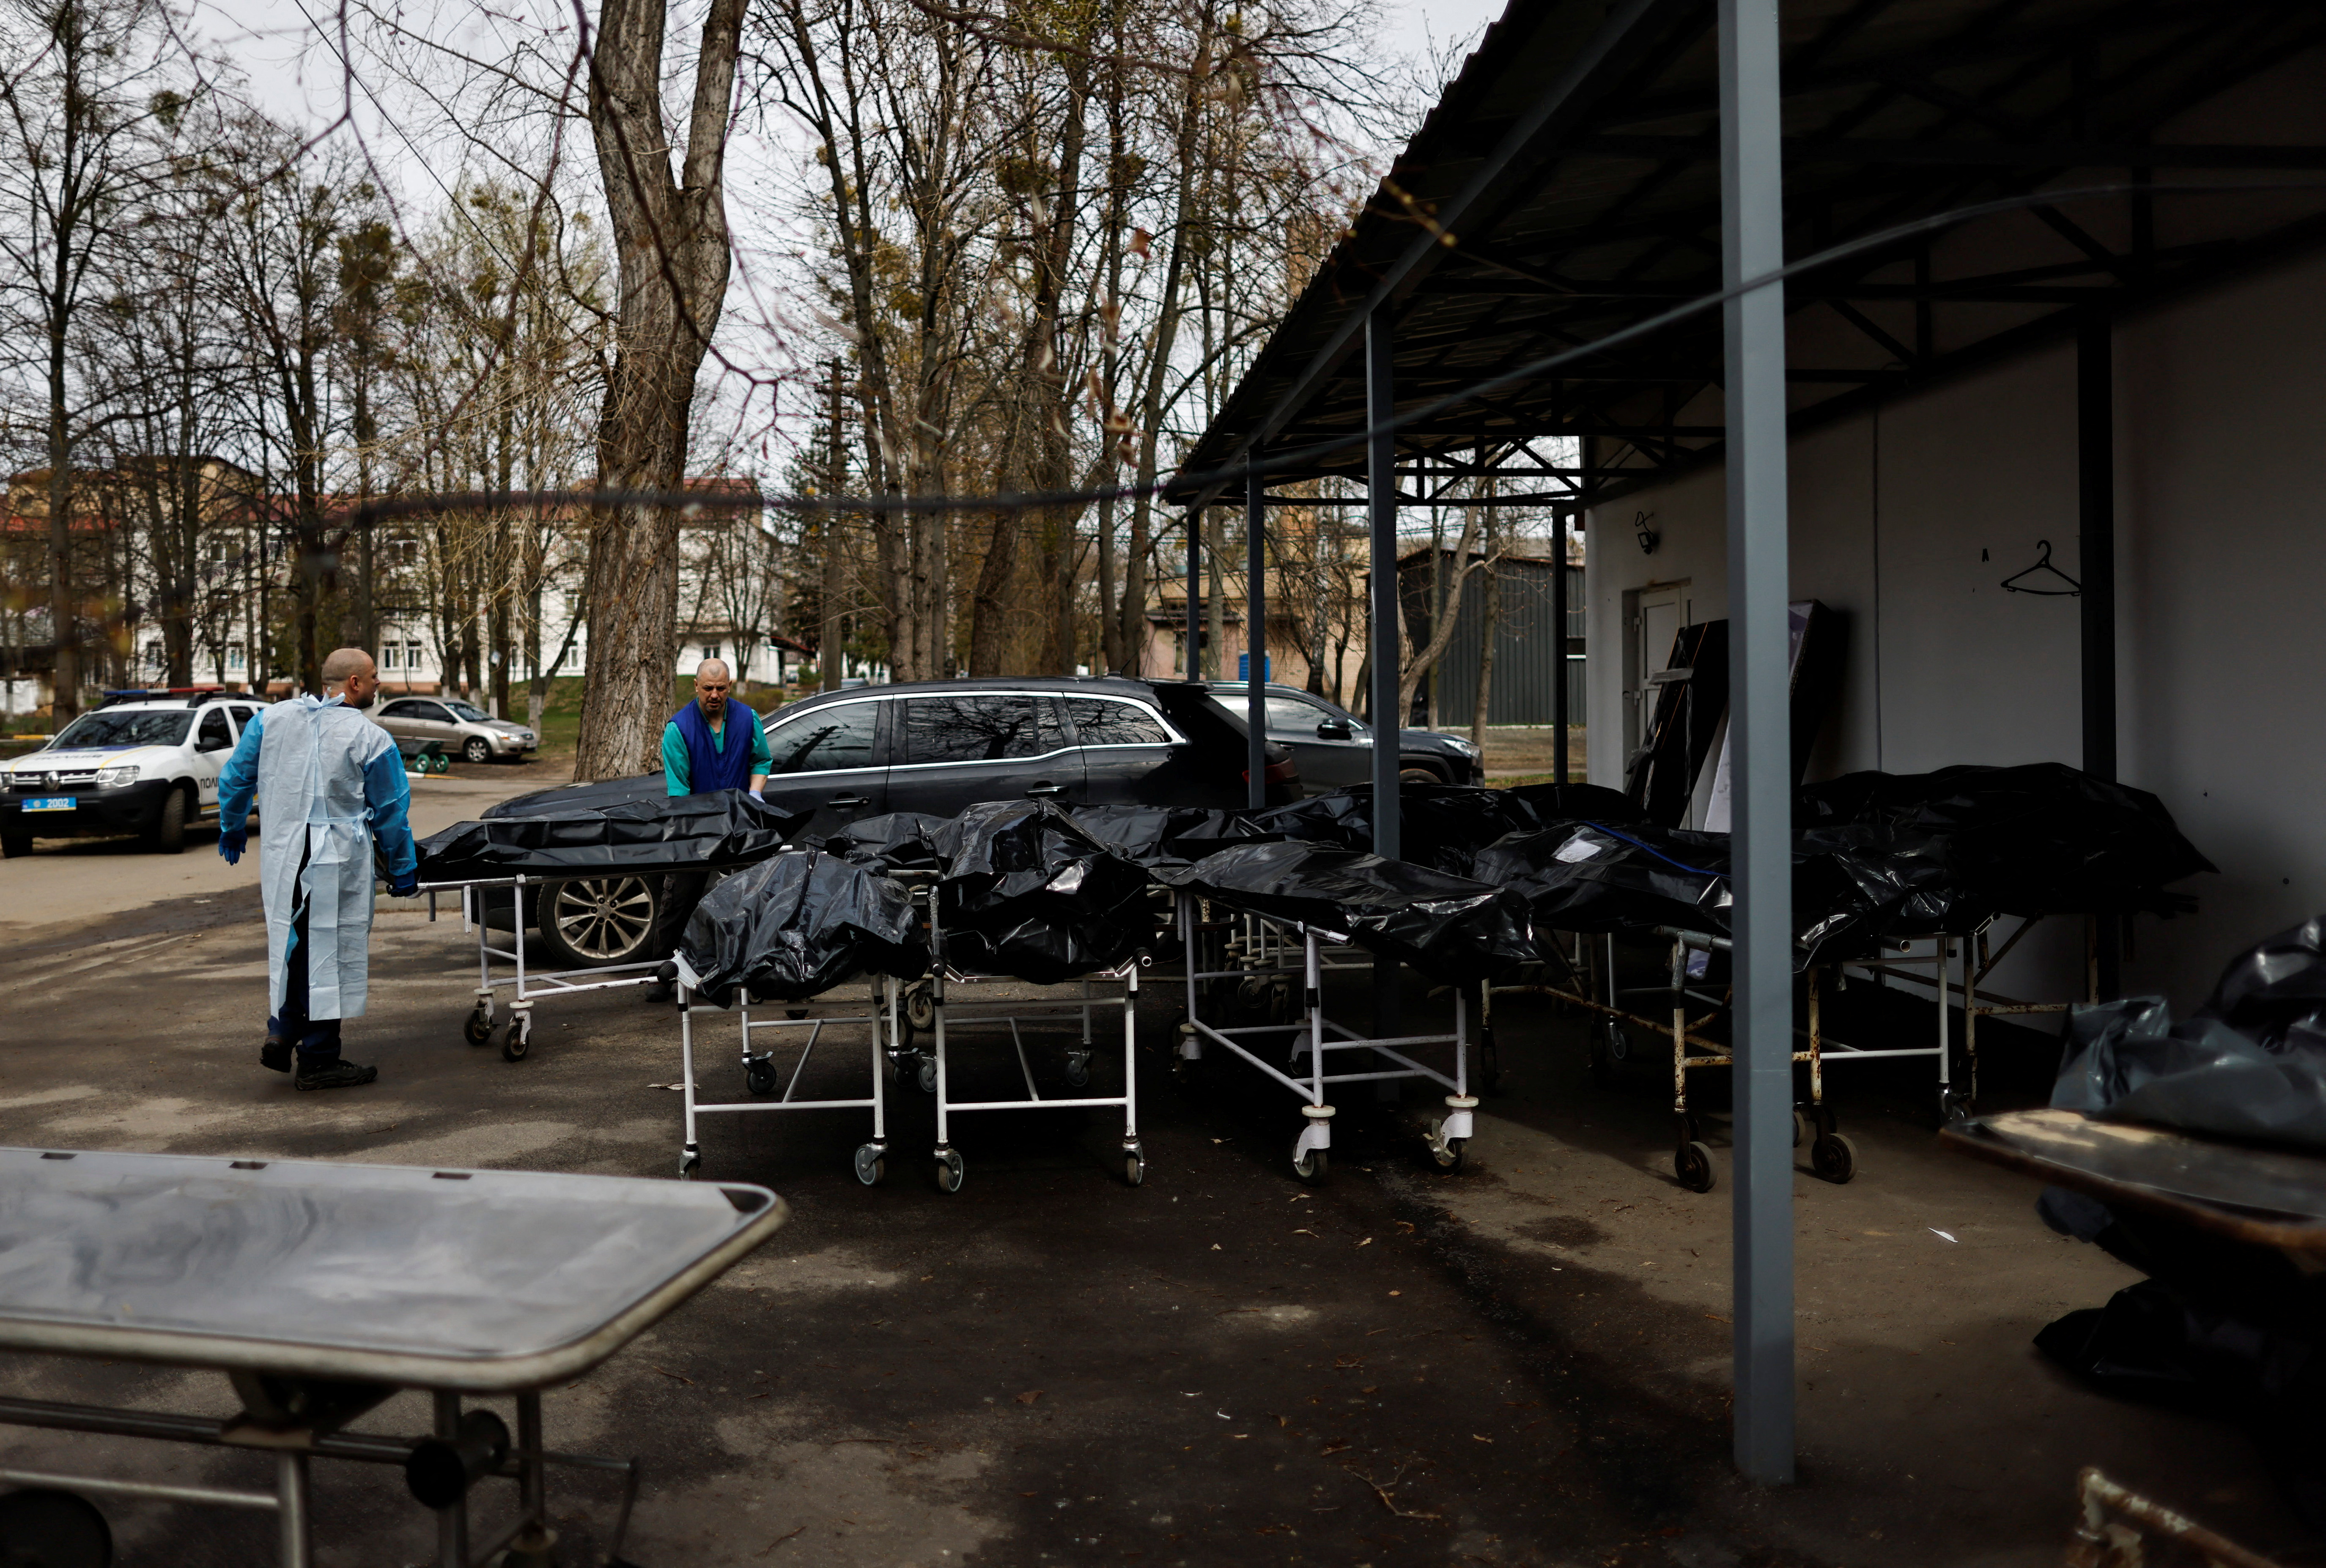 Bodies waiting to be identified by their families, amid Russia's invasion of Ukraine, are seen outside the morgue in Bucha